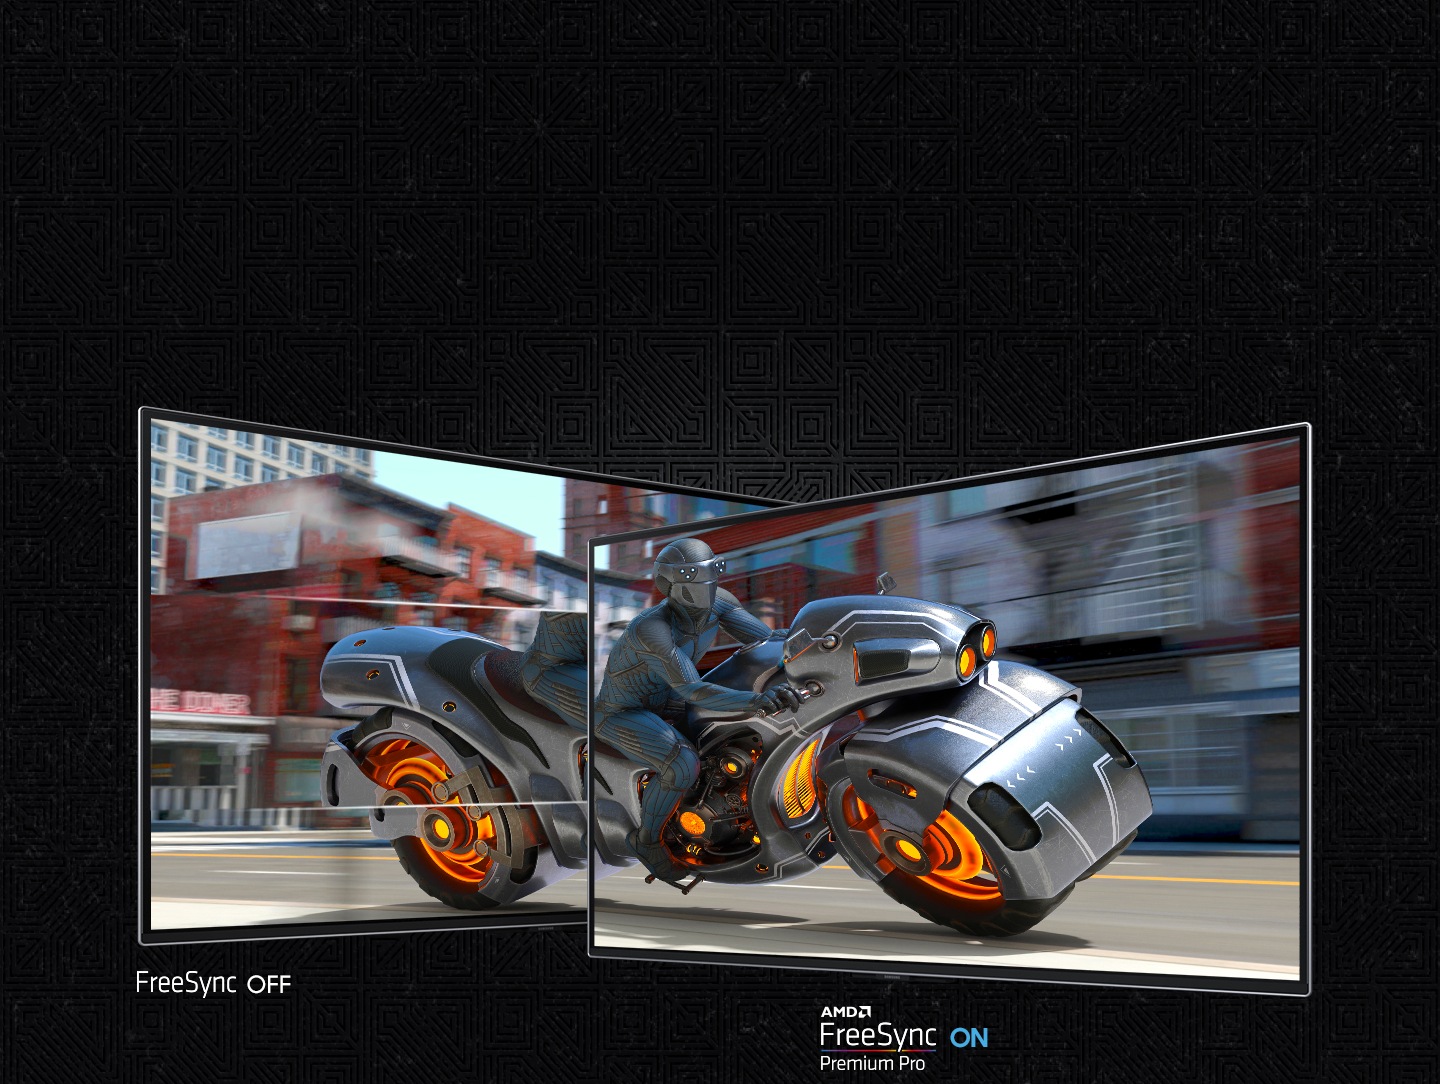 A screen shows a man riding a futuristic motorcycle and it is divided into two sections. The left section, labled "FreeSync OFF" shows the screen stuttering. The right side, labled "AMD FreeSync Premium Pro ON" is clear.